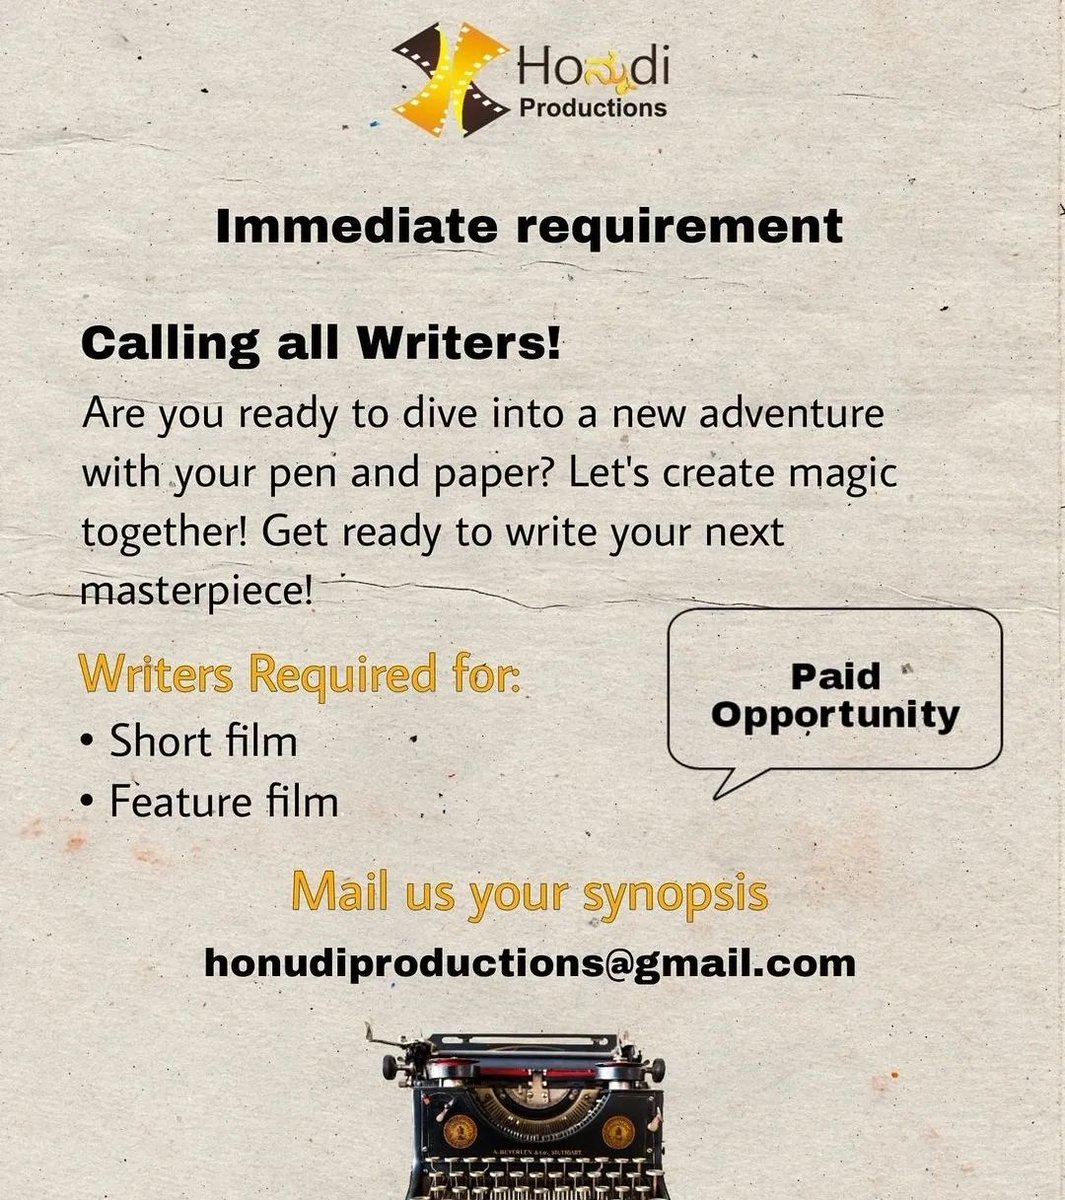 📣 𝐒𝐜𝐫𝐞𝐞𝐧𝐰𝐫𝐢𝐭𝐞𝐫𝐬 𝐑𝐞𝐪𝐮𝐢𝐫𝐞𝐝

Honudi Productions is looking for writers for their Short & Feature length films.

Mail your synopsis to;
honudiproductions@gmail.com

#Writers #screenwriting #KannadaFilms